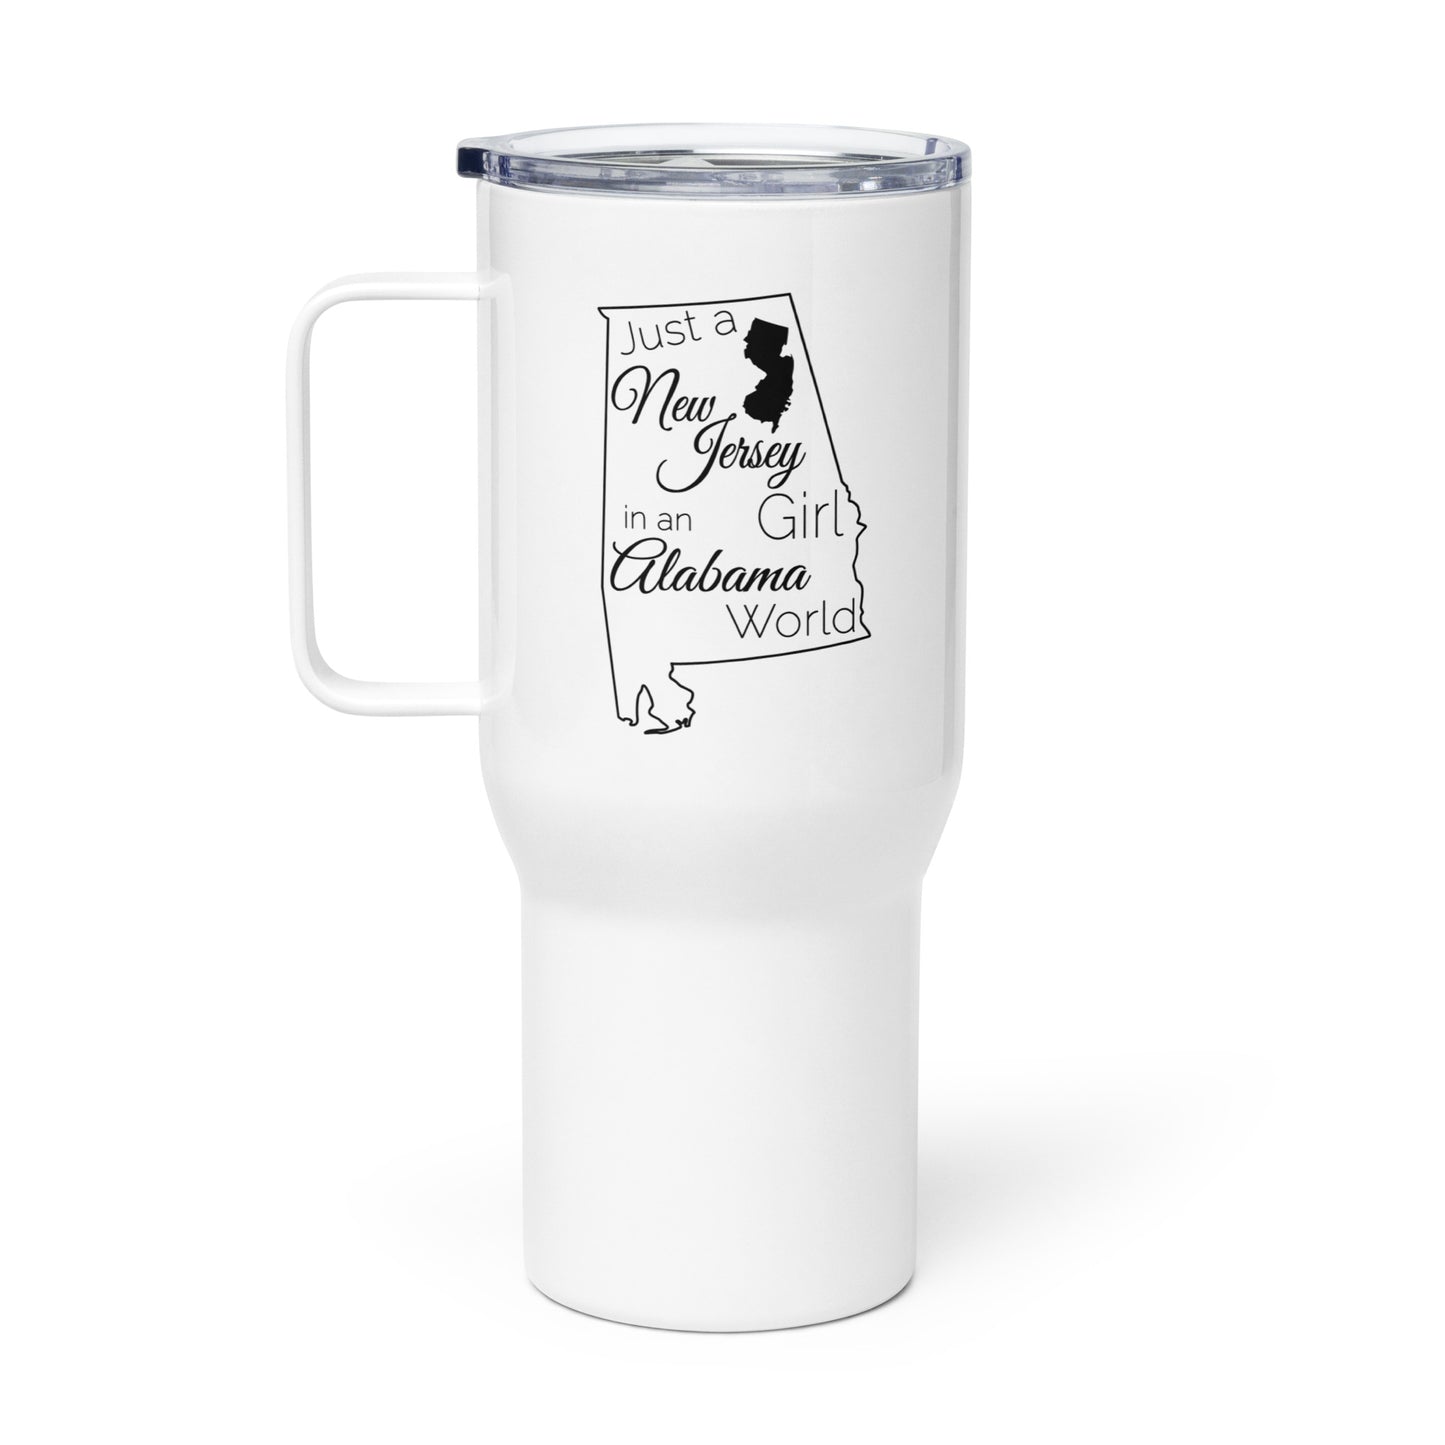 Just a New Jersey Girl in an Alabama World Travel mug with a handle